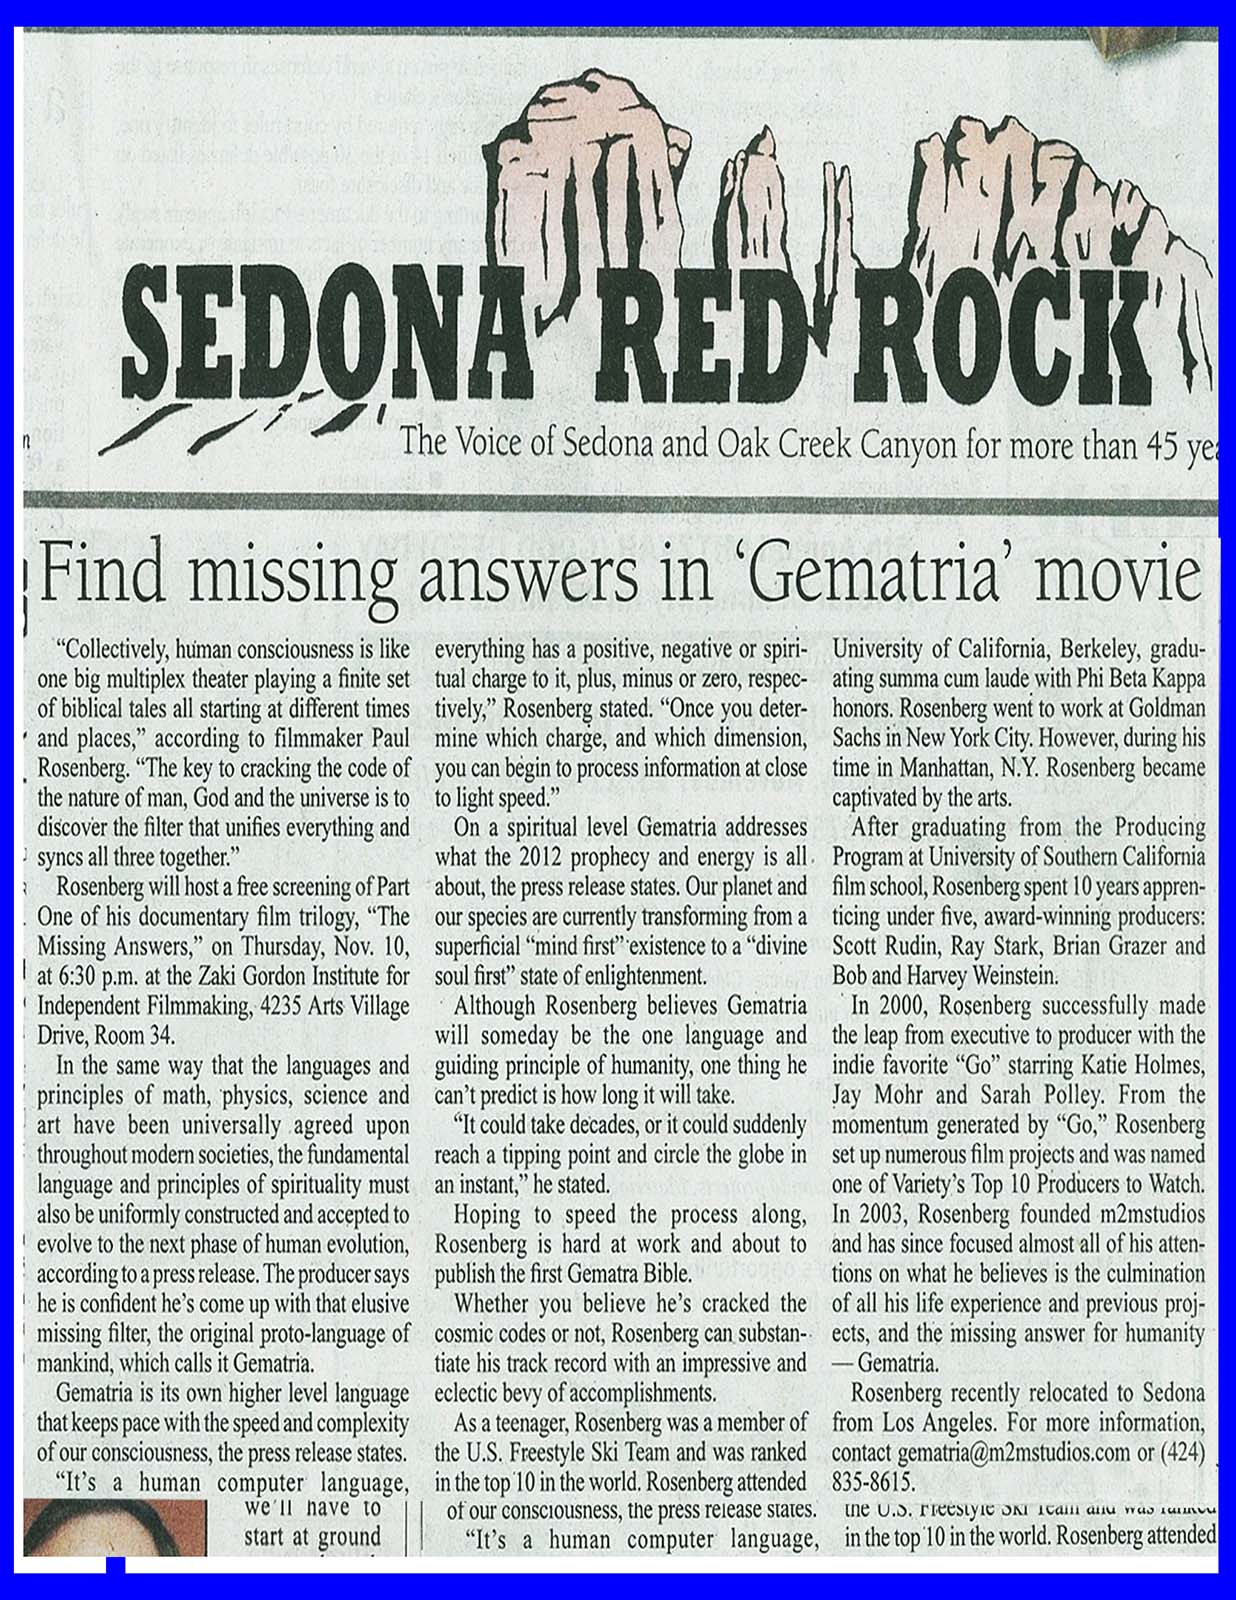 From a GEMATRIA!! - Part 1 The SOULOgraphic Principle Screening in Sedona